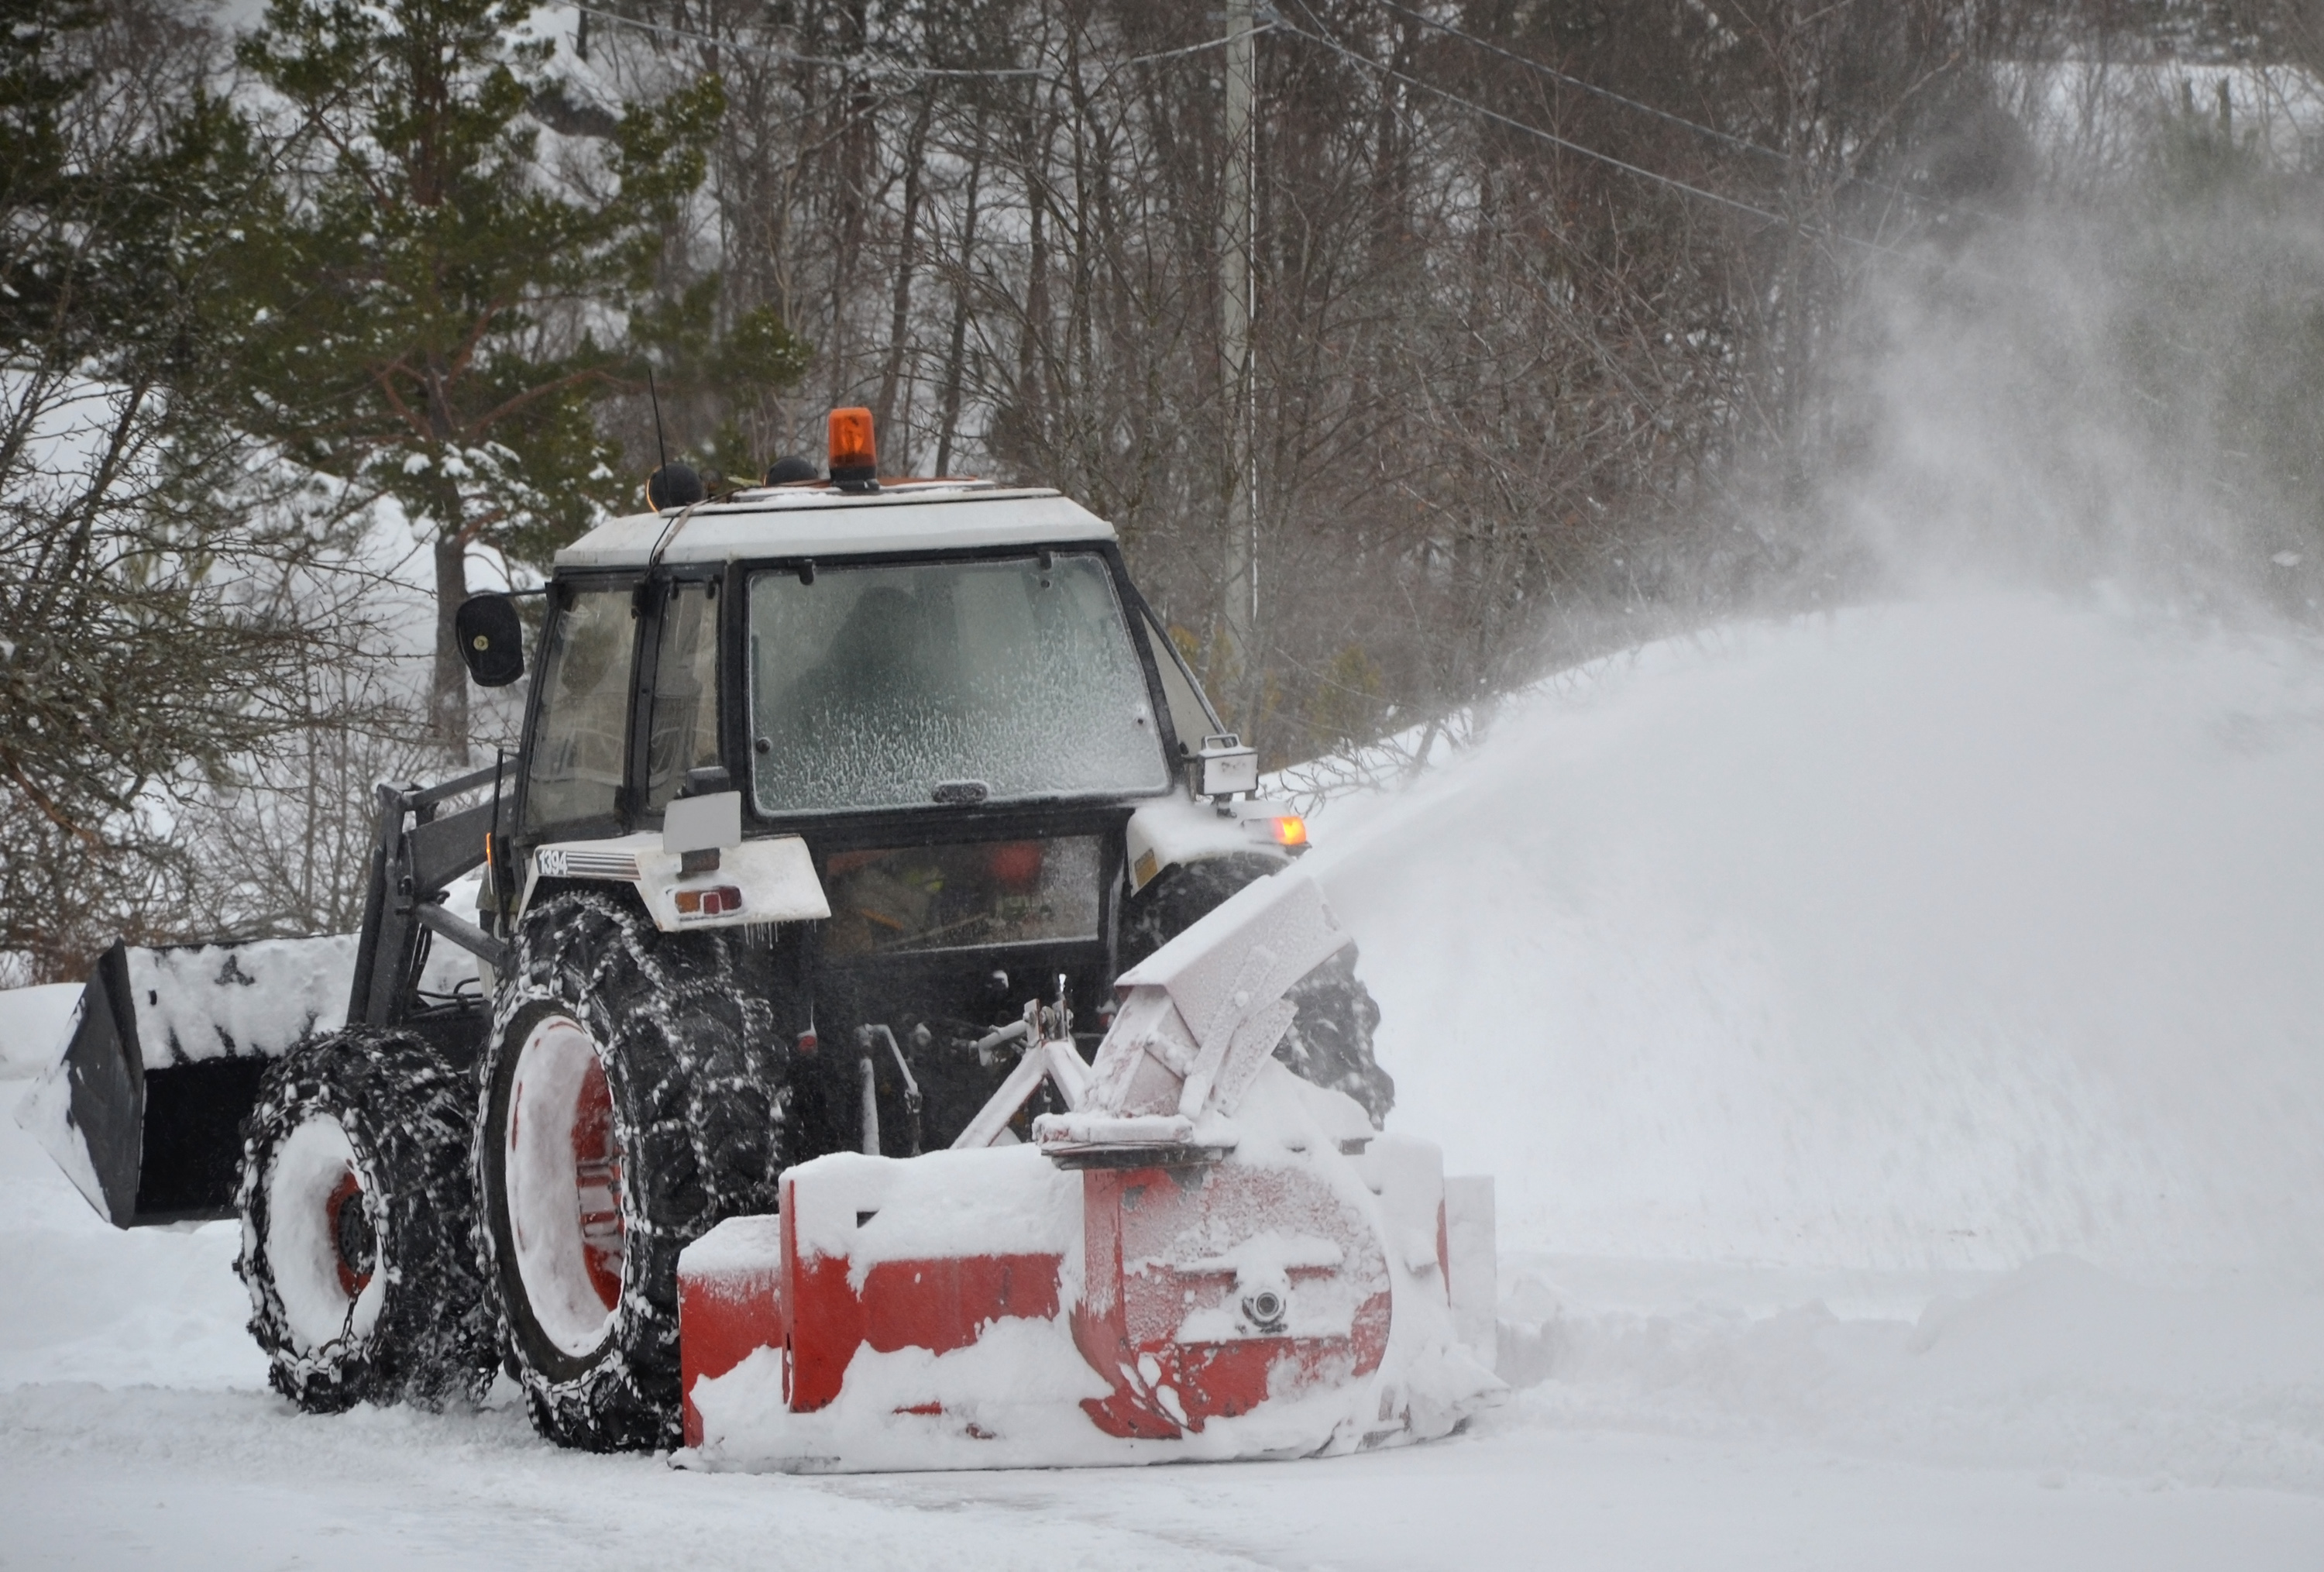 Tractor clearing snow